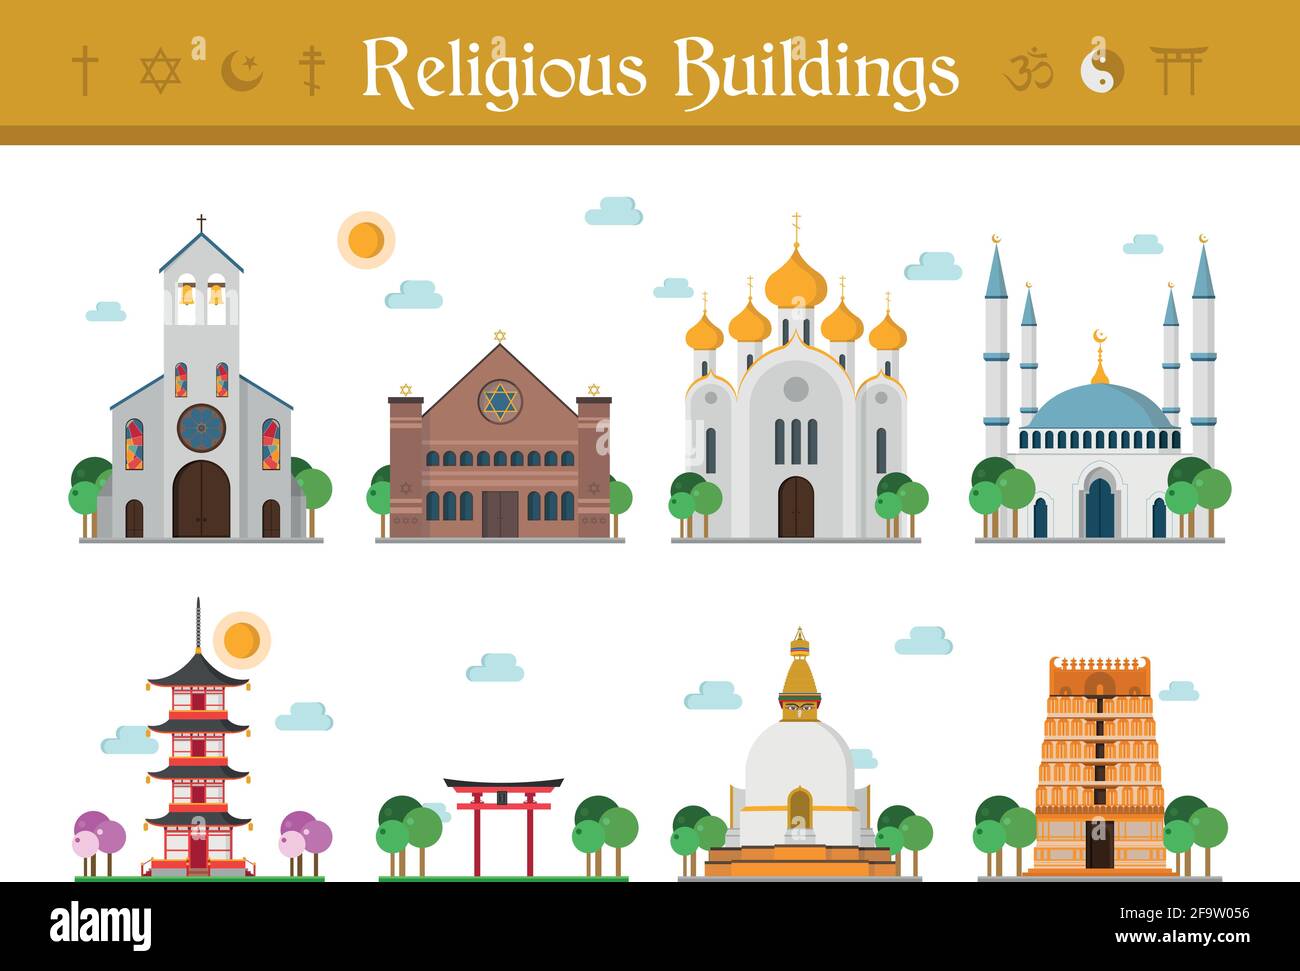 Set of Religious Buildings Vector Illustration: Catholicism, Judaism, Orthodox Church, Islamism, Buddhism, Taoism and Hinduism. Stock Vector